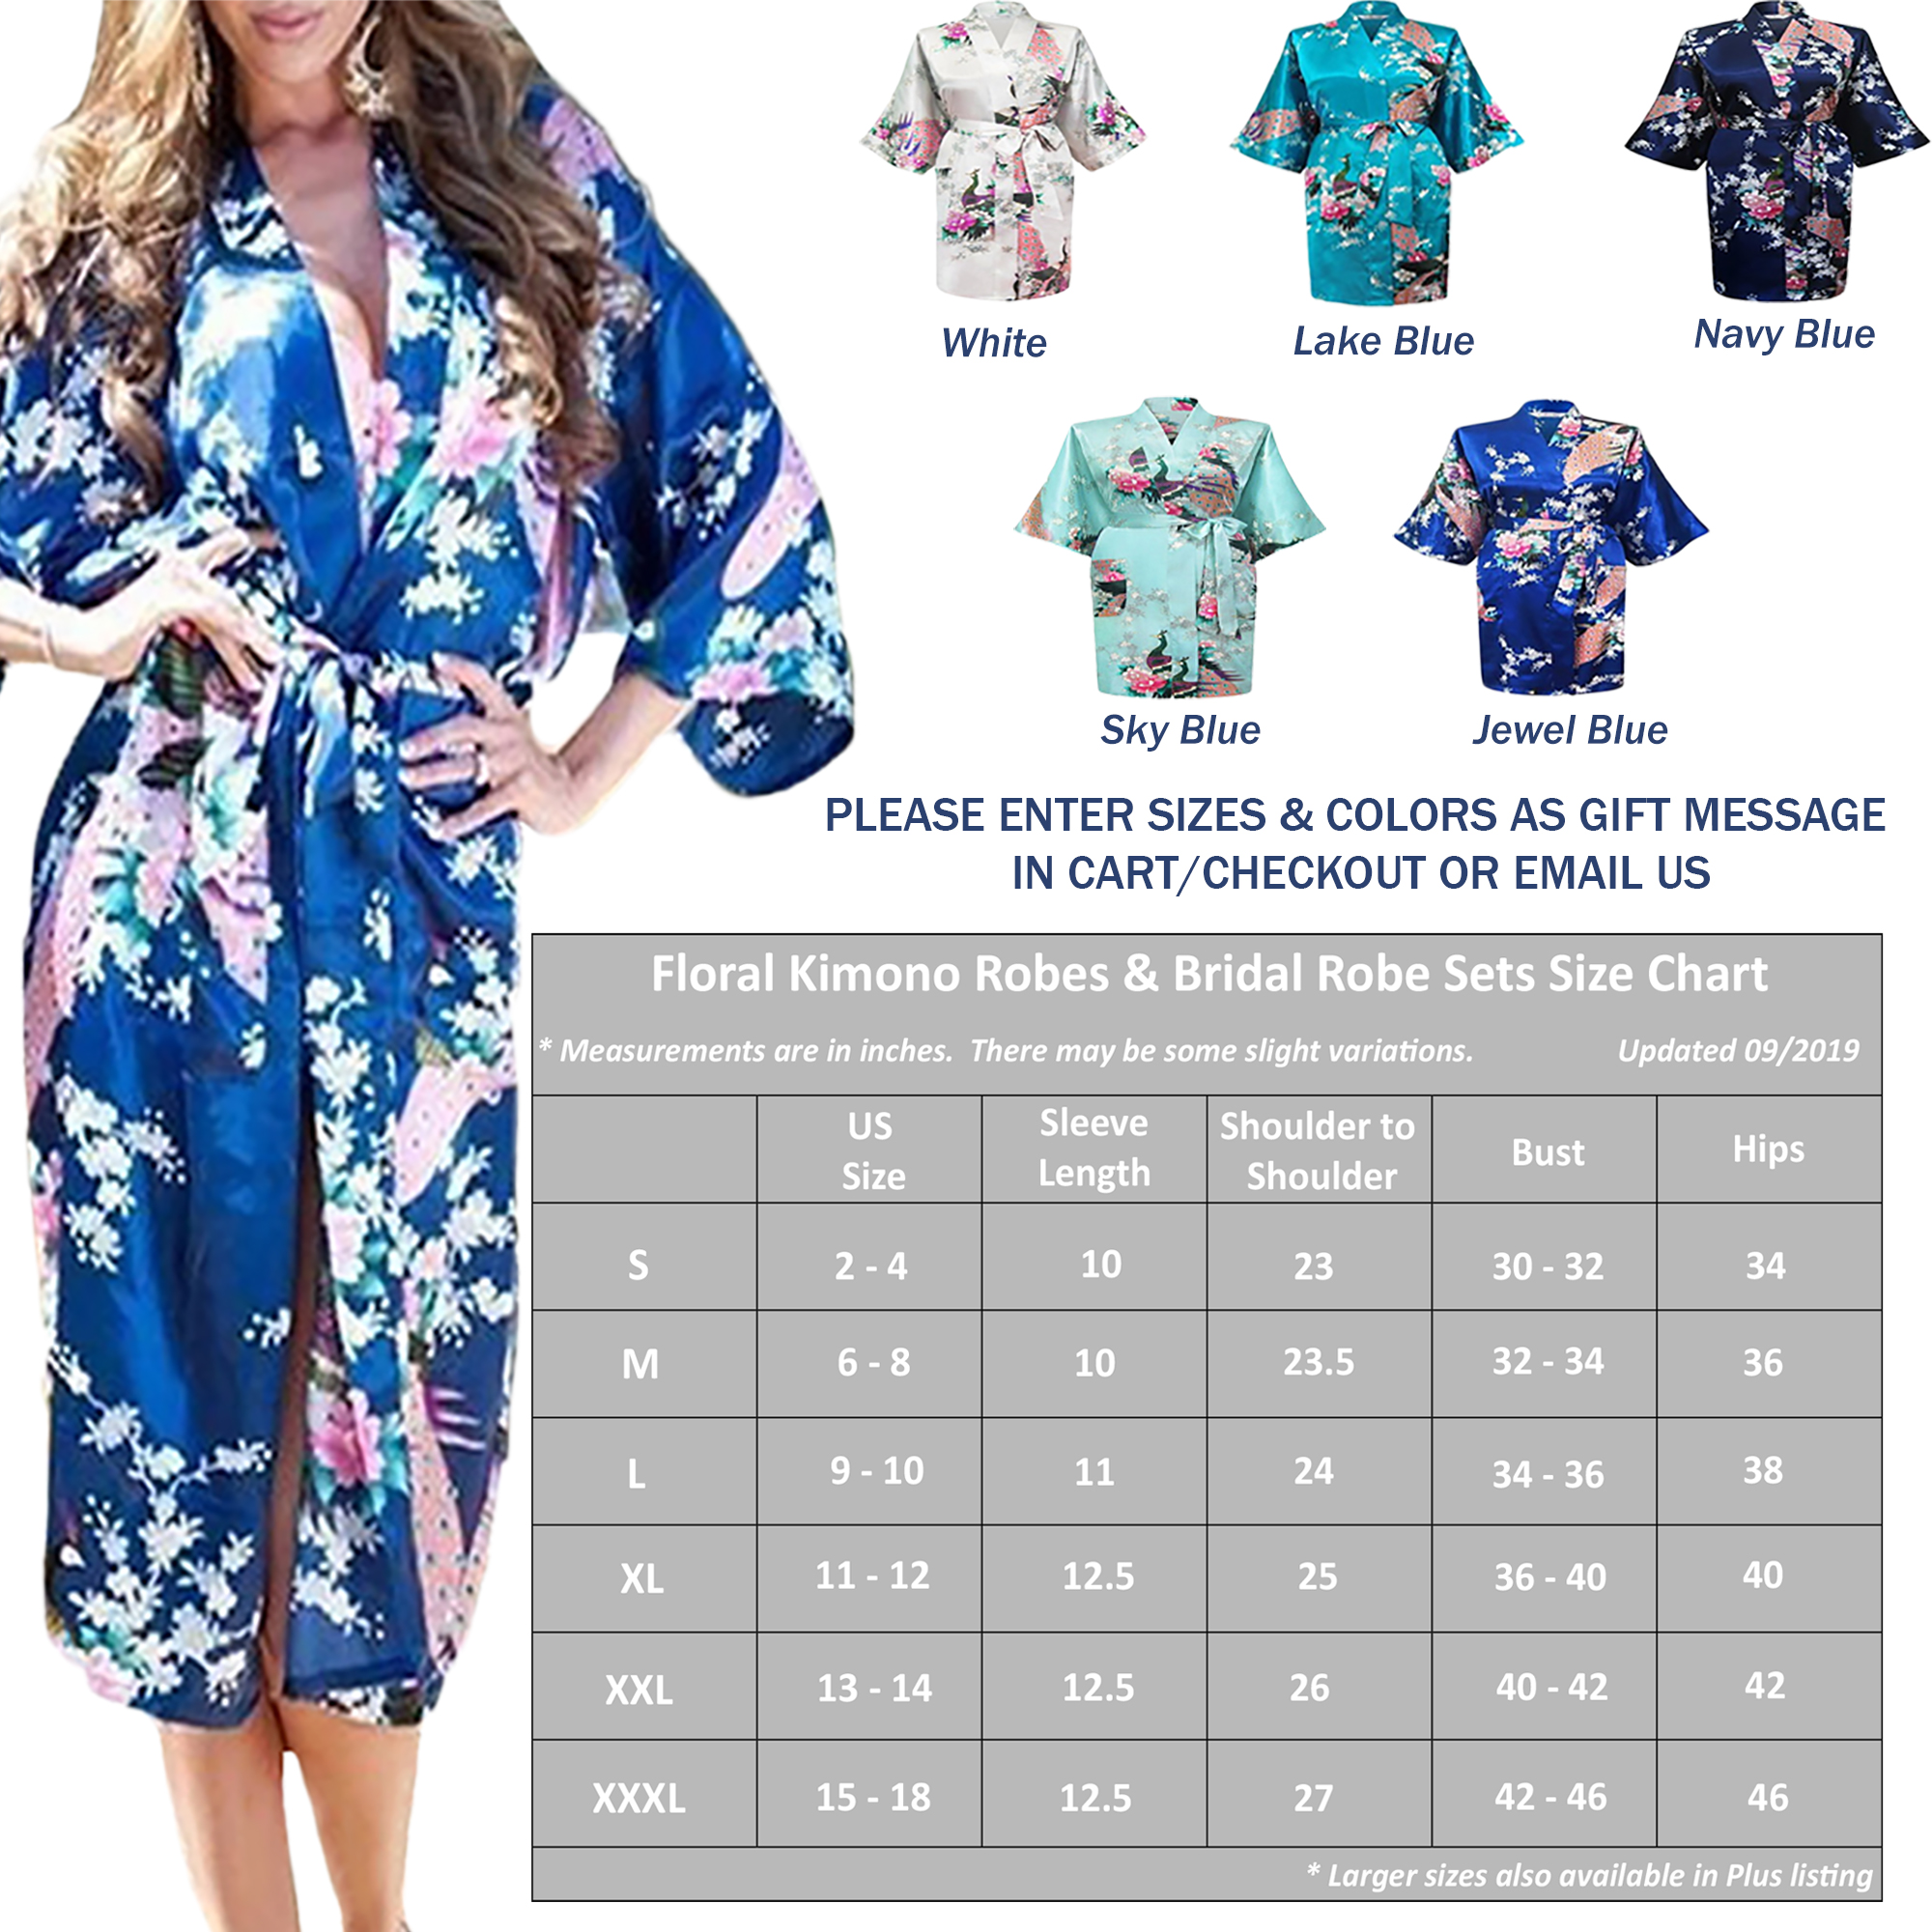 Gifts Are Blue Floral Bridal Party Bride & Bridesmaid Robes Sets, Sizes 2-18, Set of 10